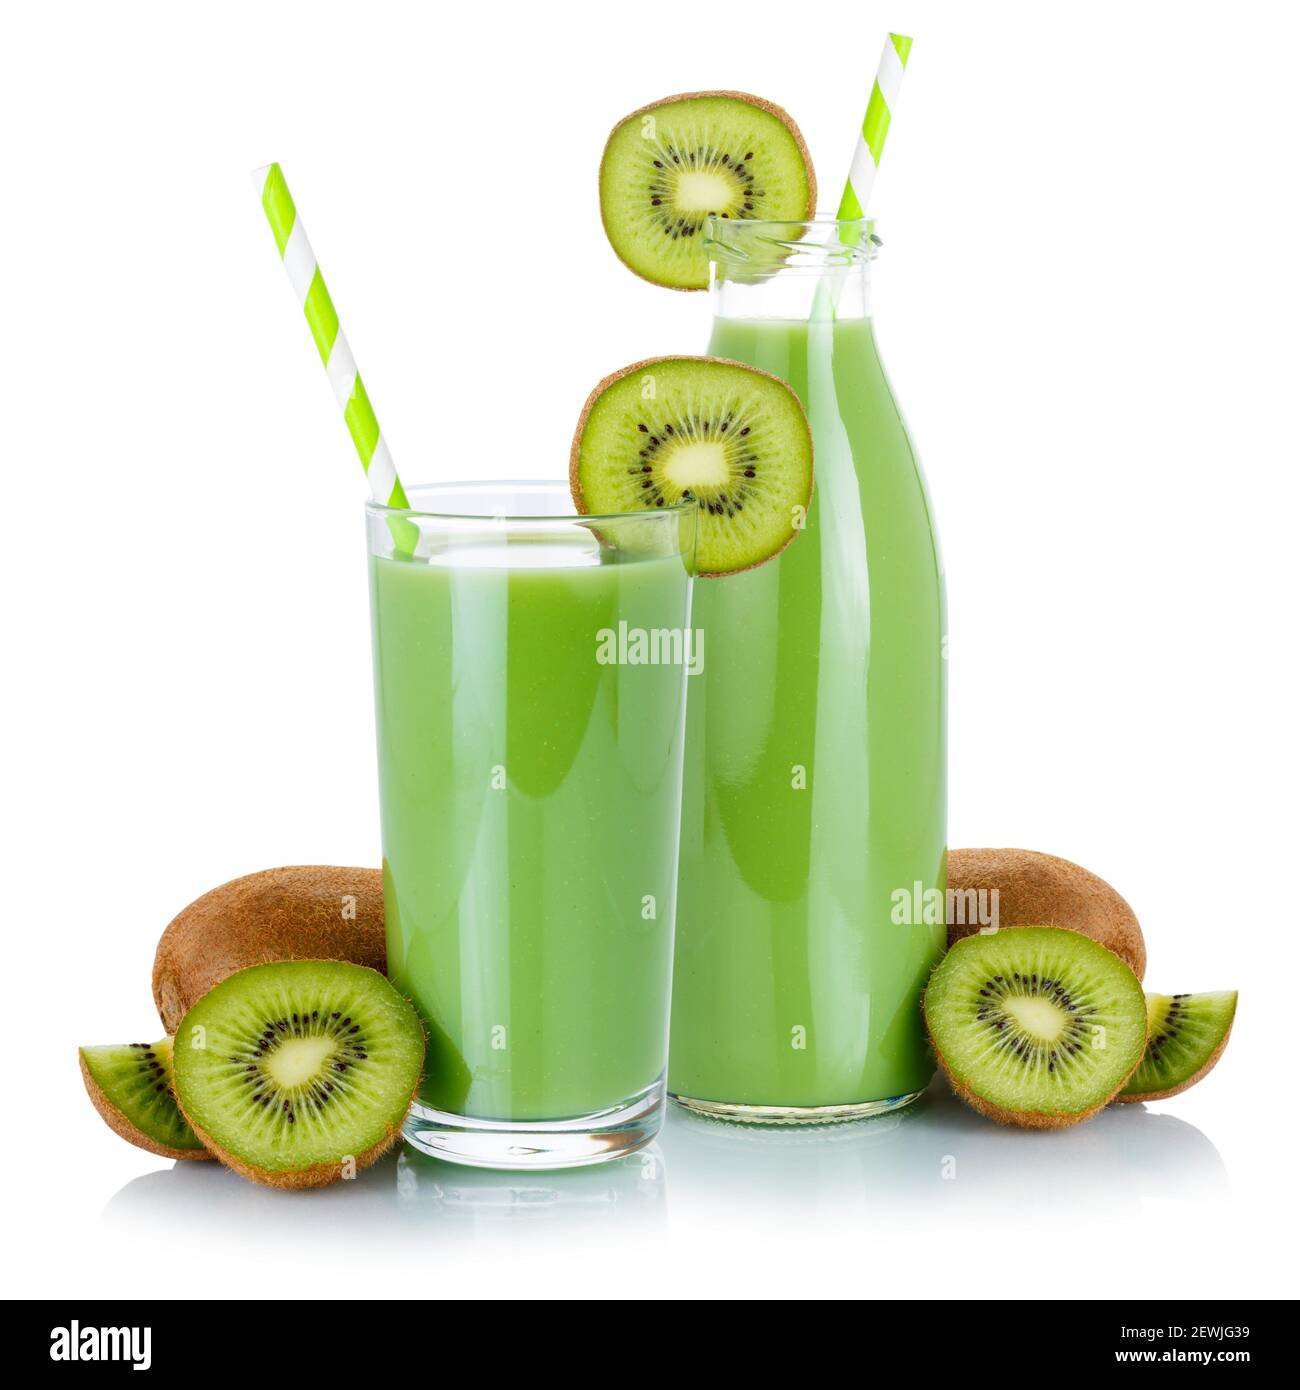 Green smoothie fruit juice drink straw kiwi in a glass bottle isolated on a white background. Stock Photo